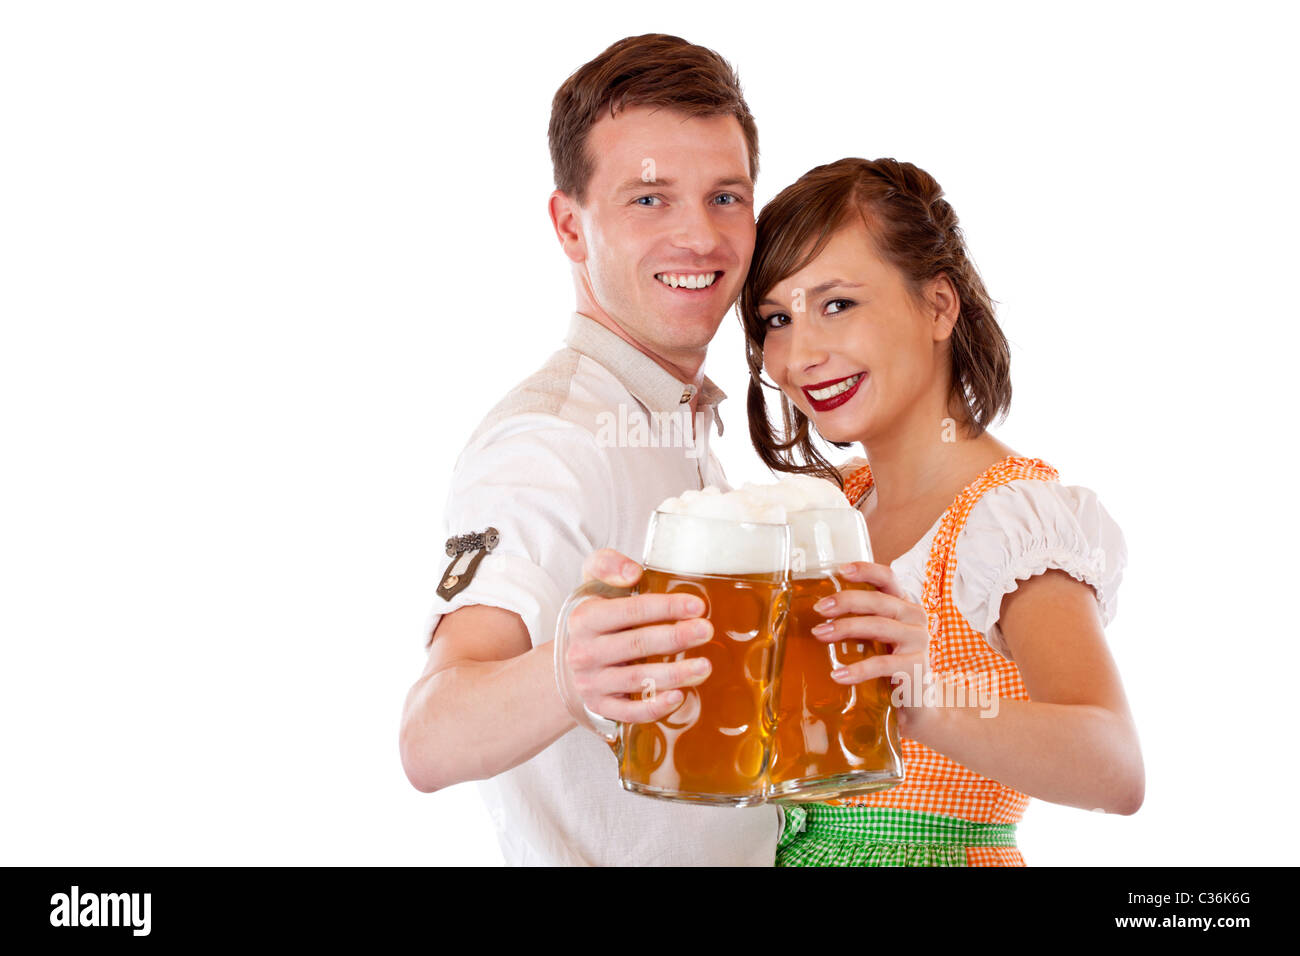 Happy Bavarian man and woman in dirndl with oktoberfest beer stein. Isolated on white background. Stock Photo